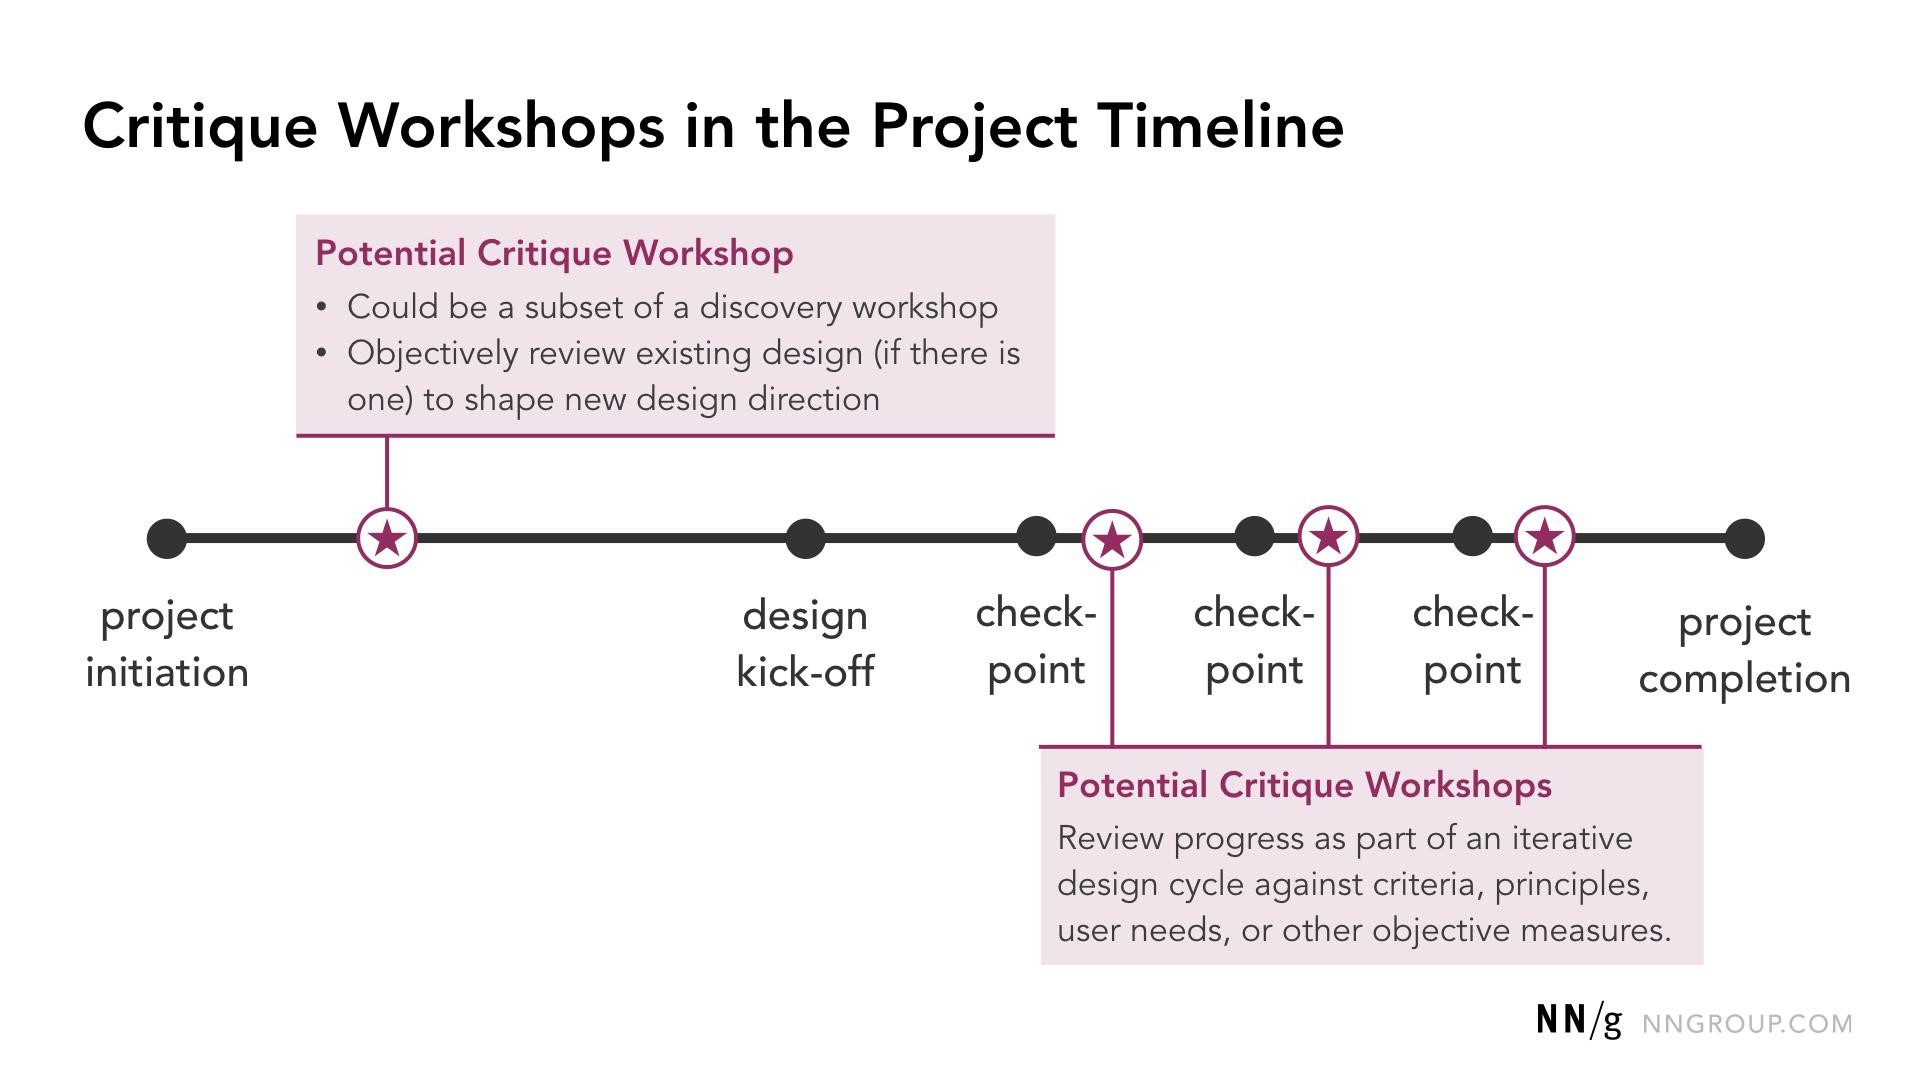 Critique Workshops in the Project Timeline